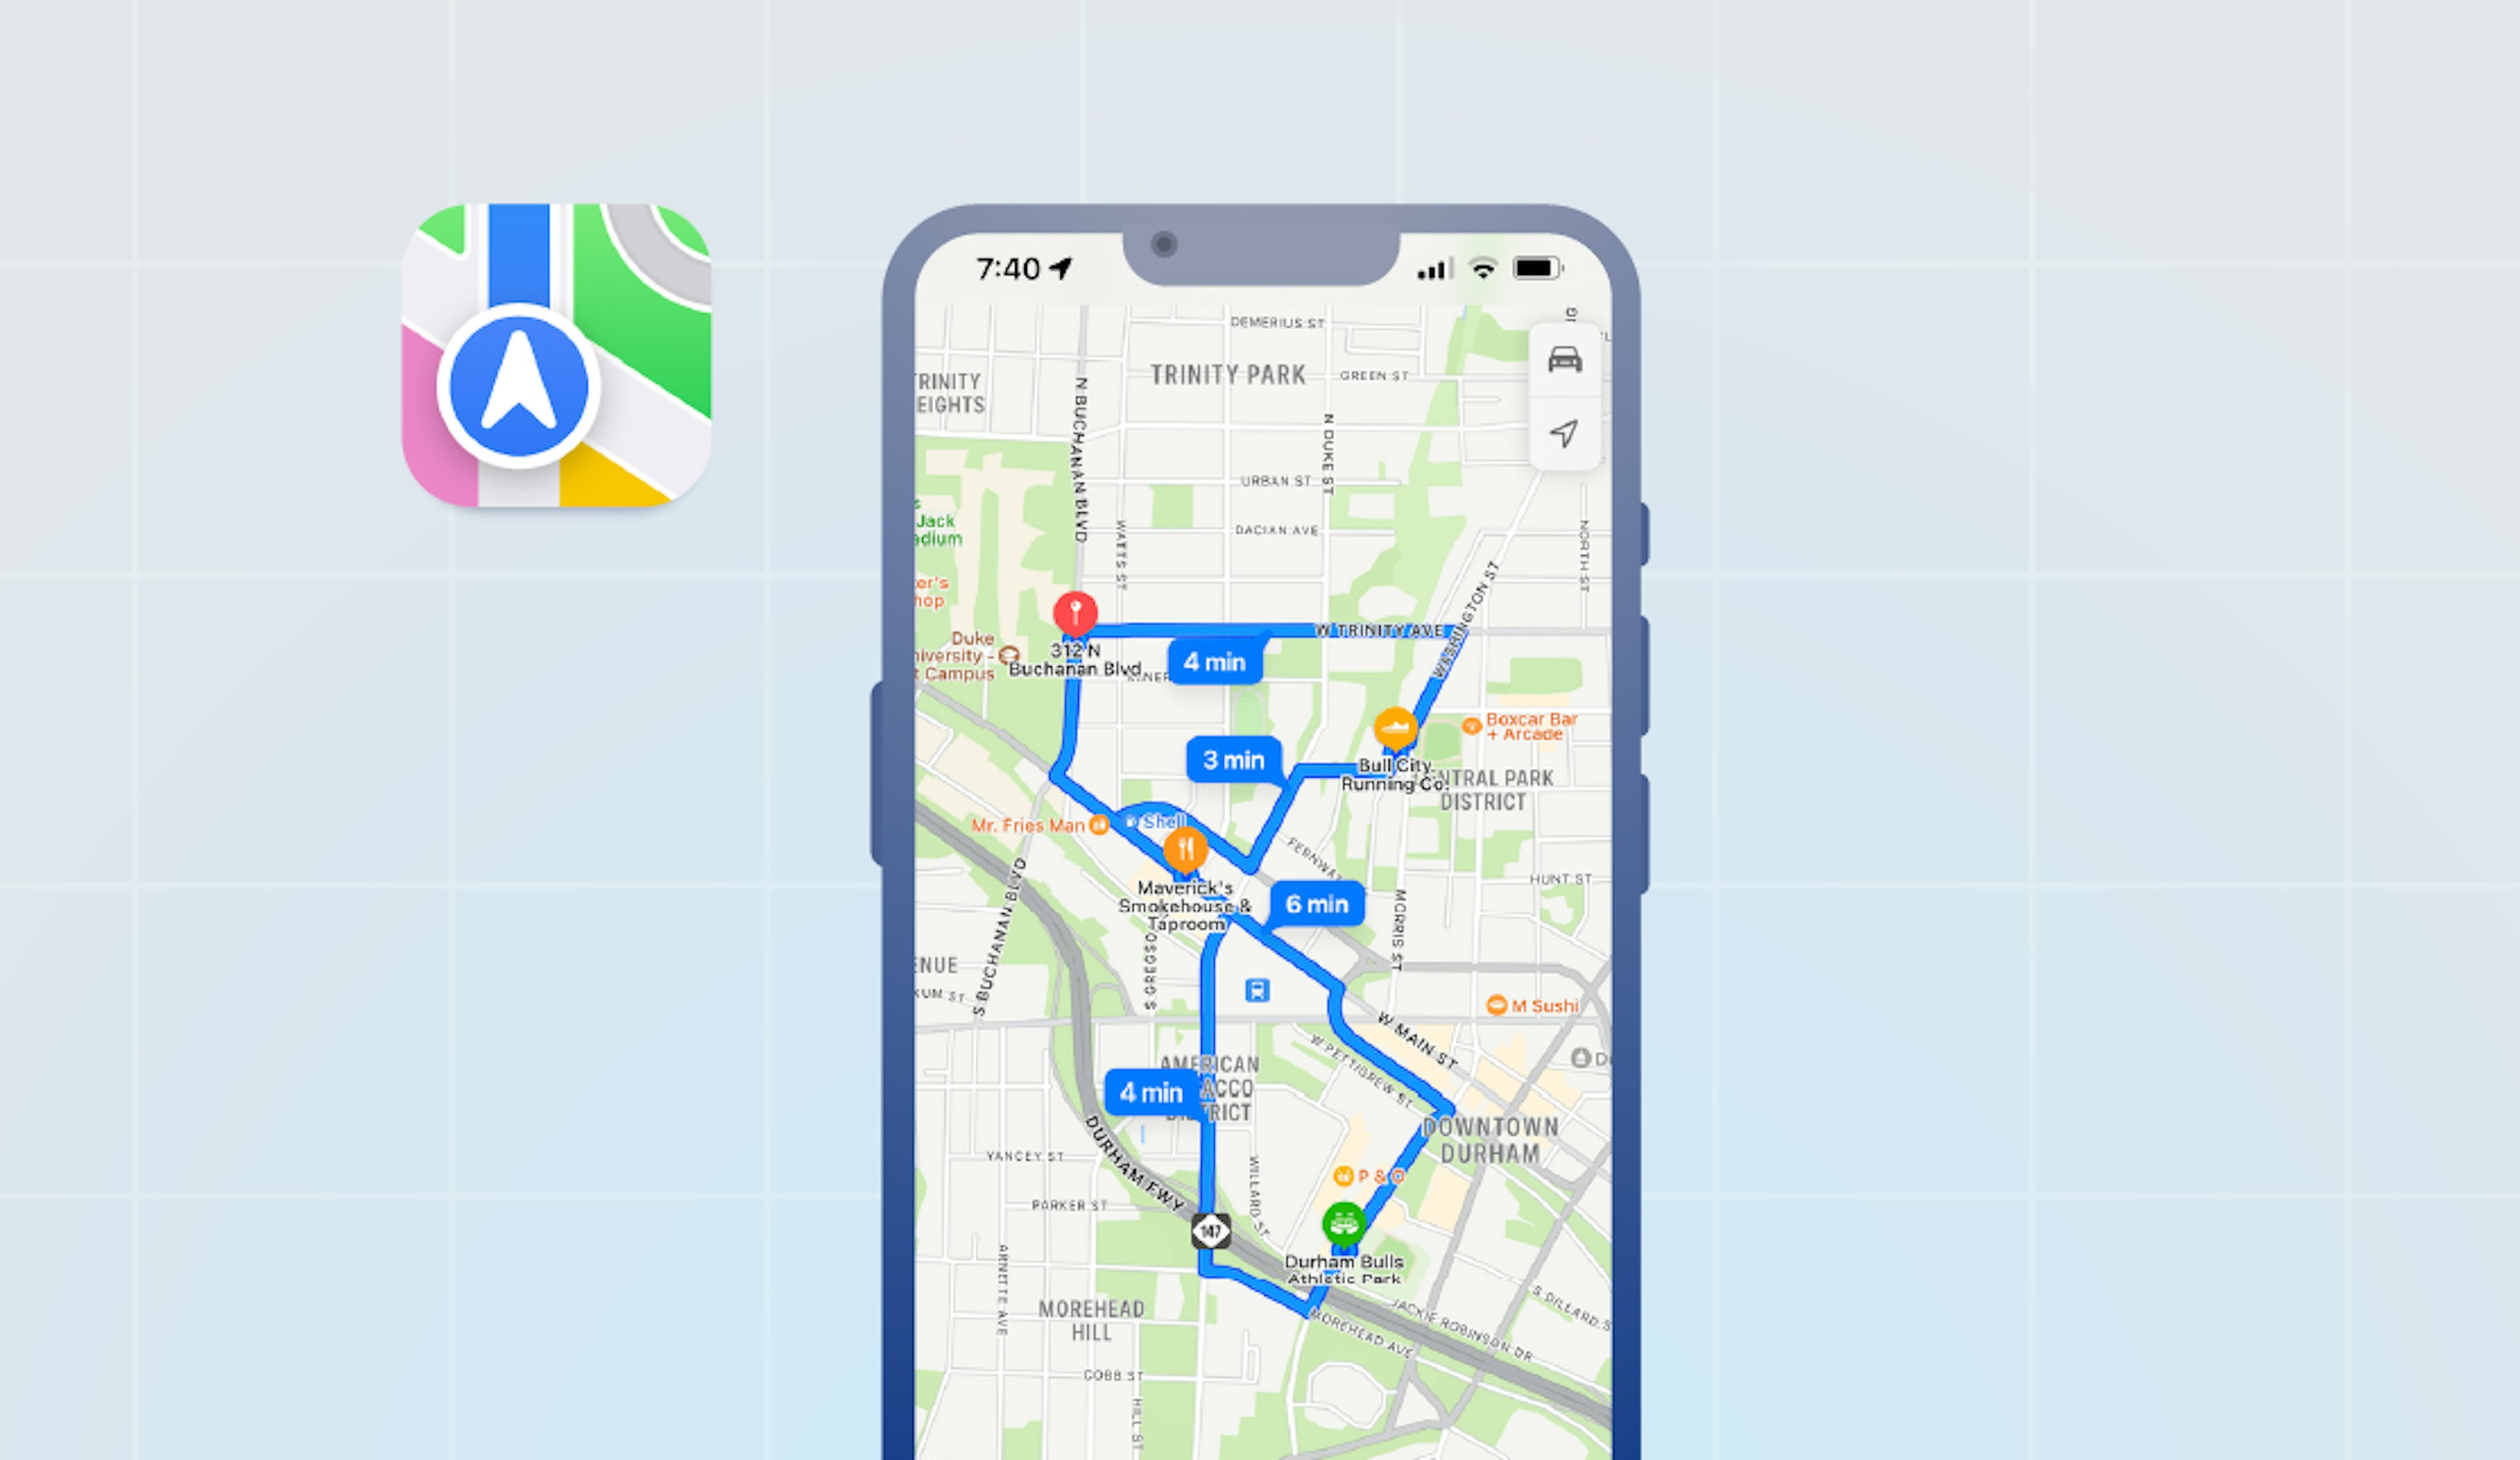 Iphone screen illustration with Apple Maps GPS map view